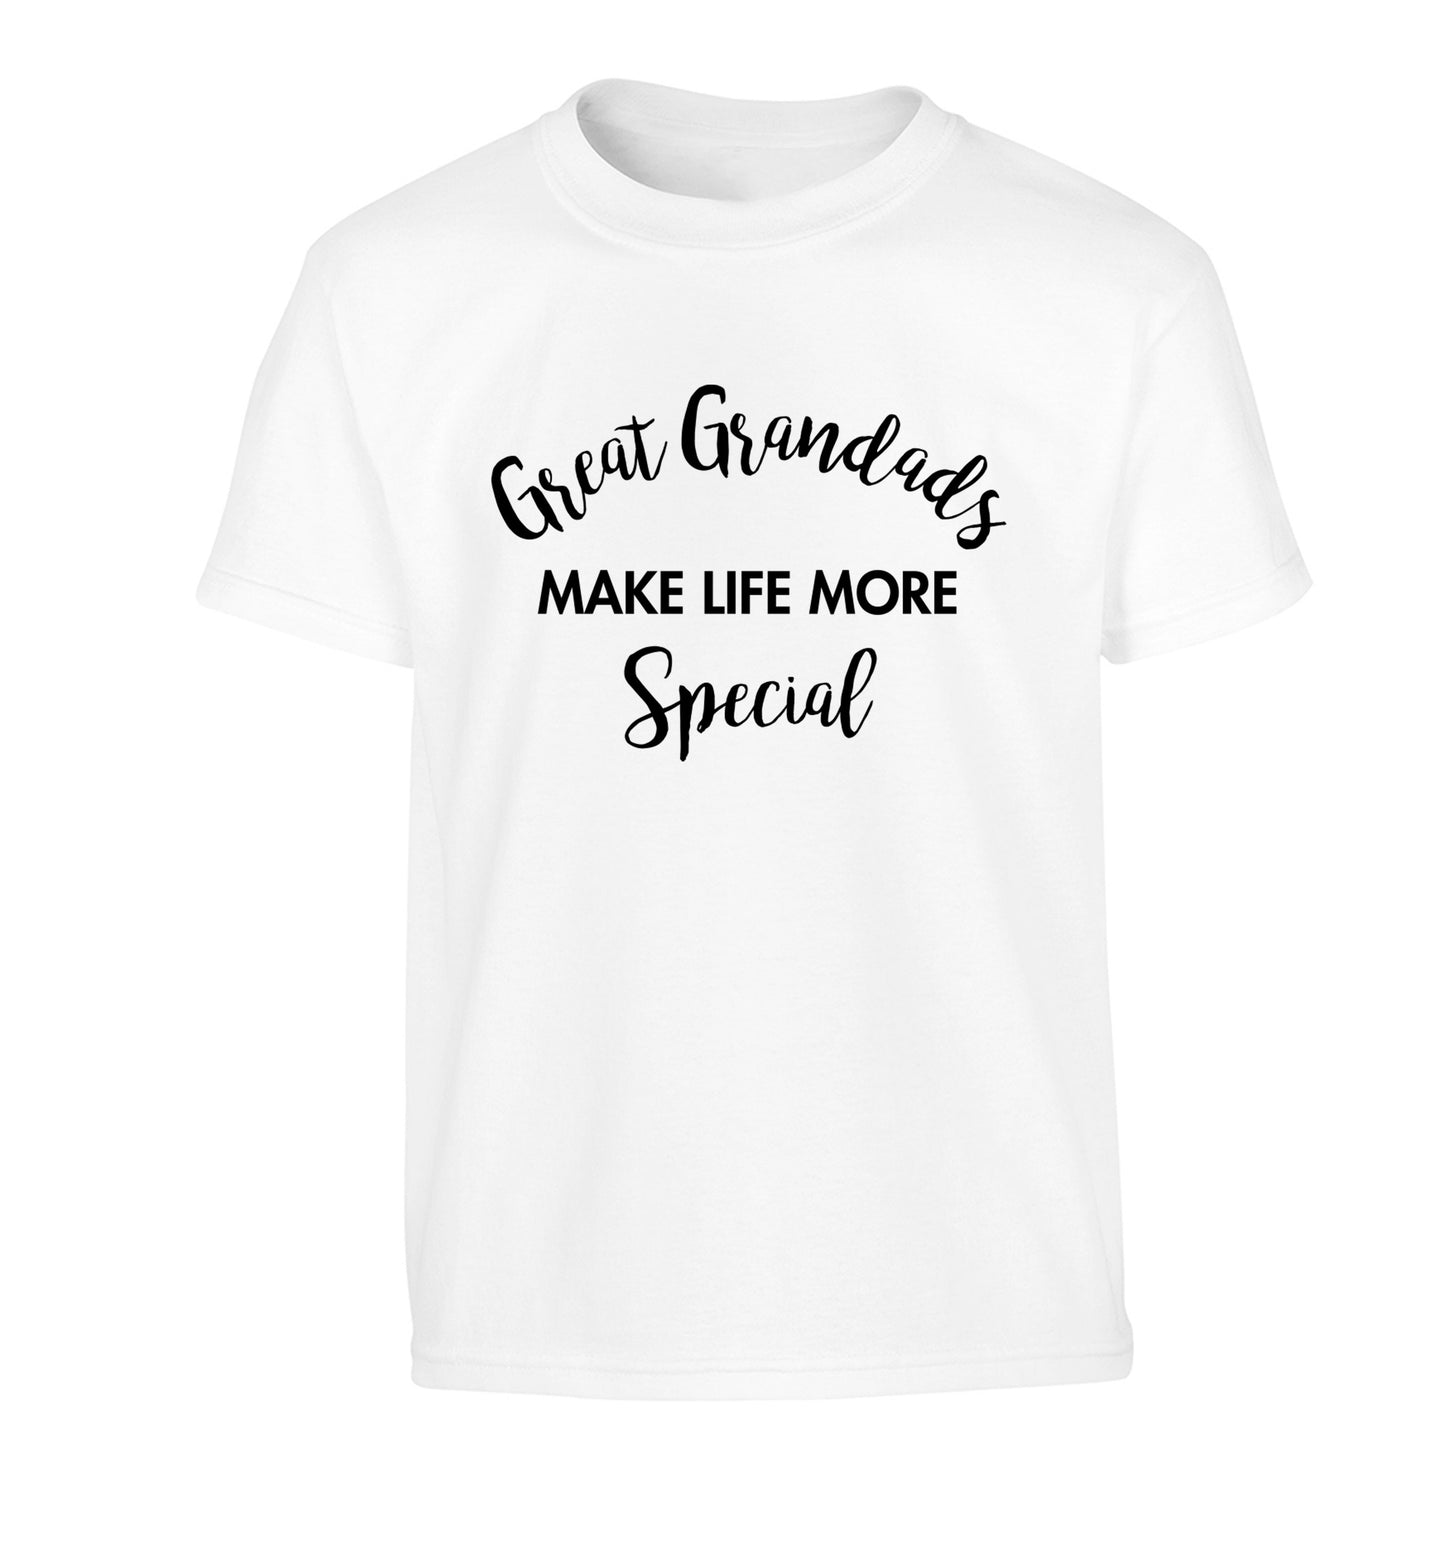 Great Grandads make life more special Children's white Tshirt 12-14 Years